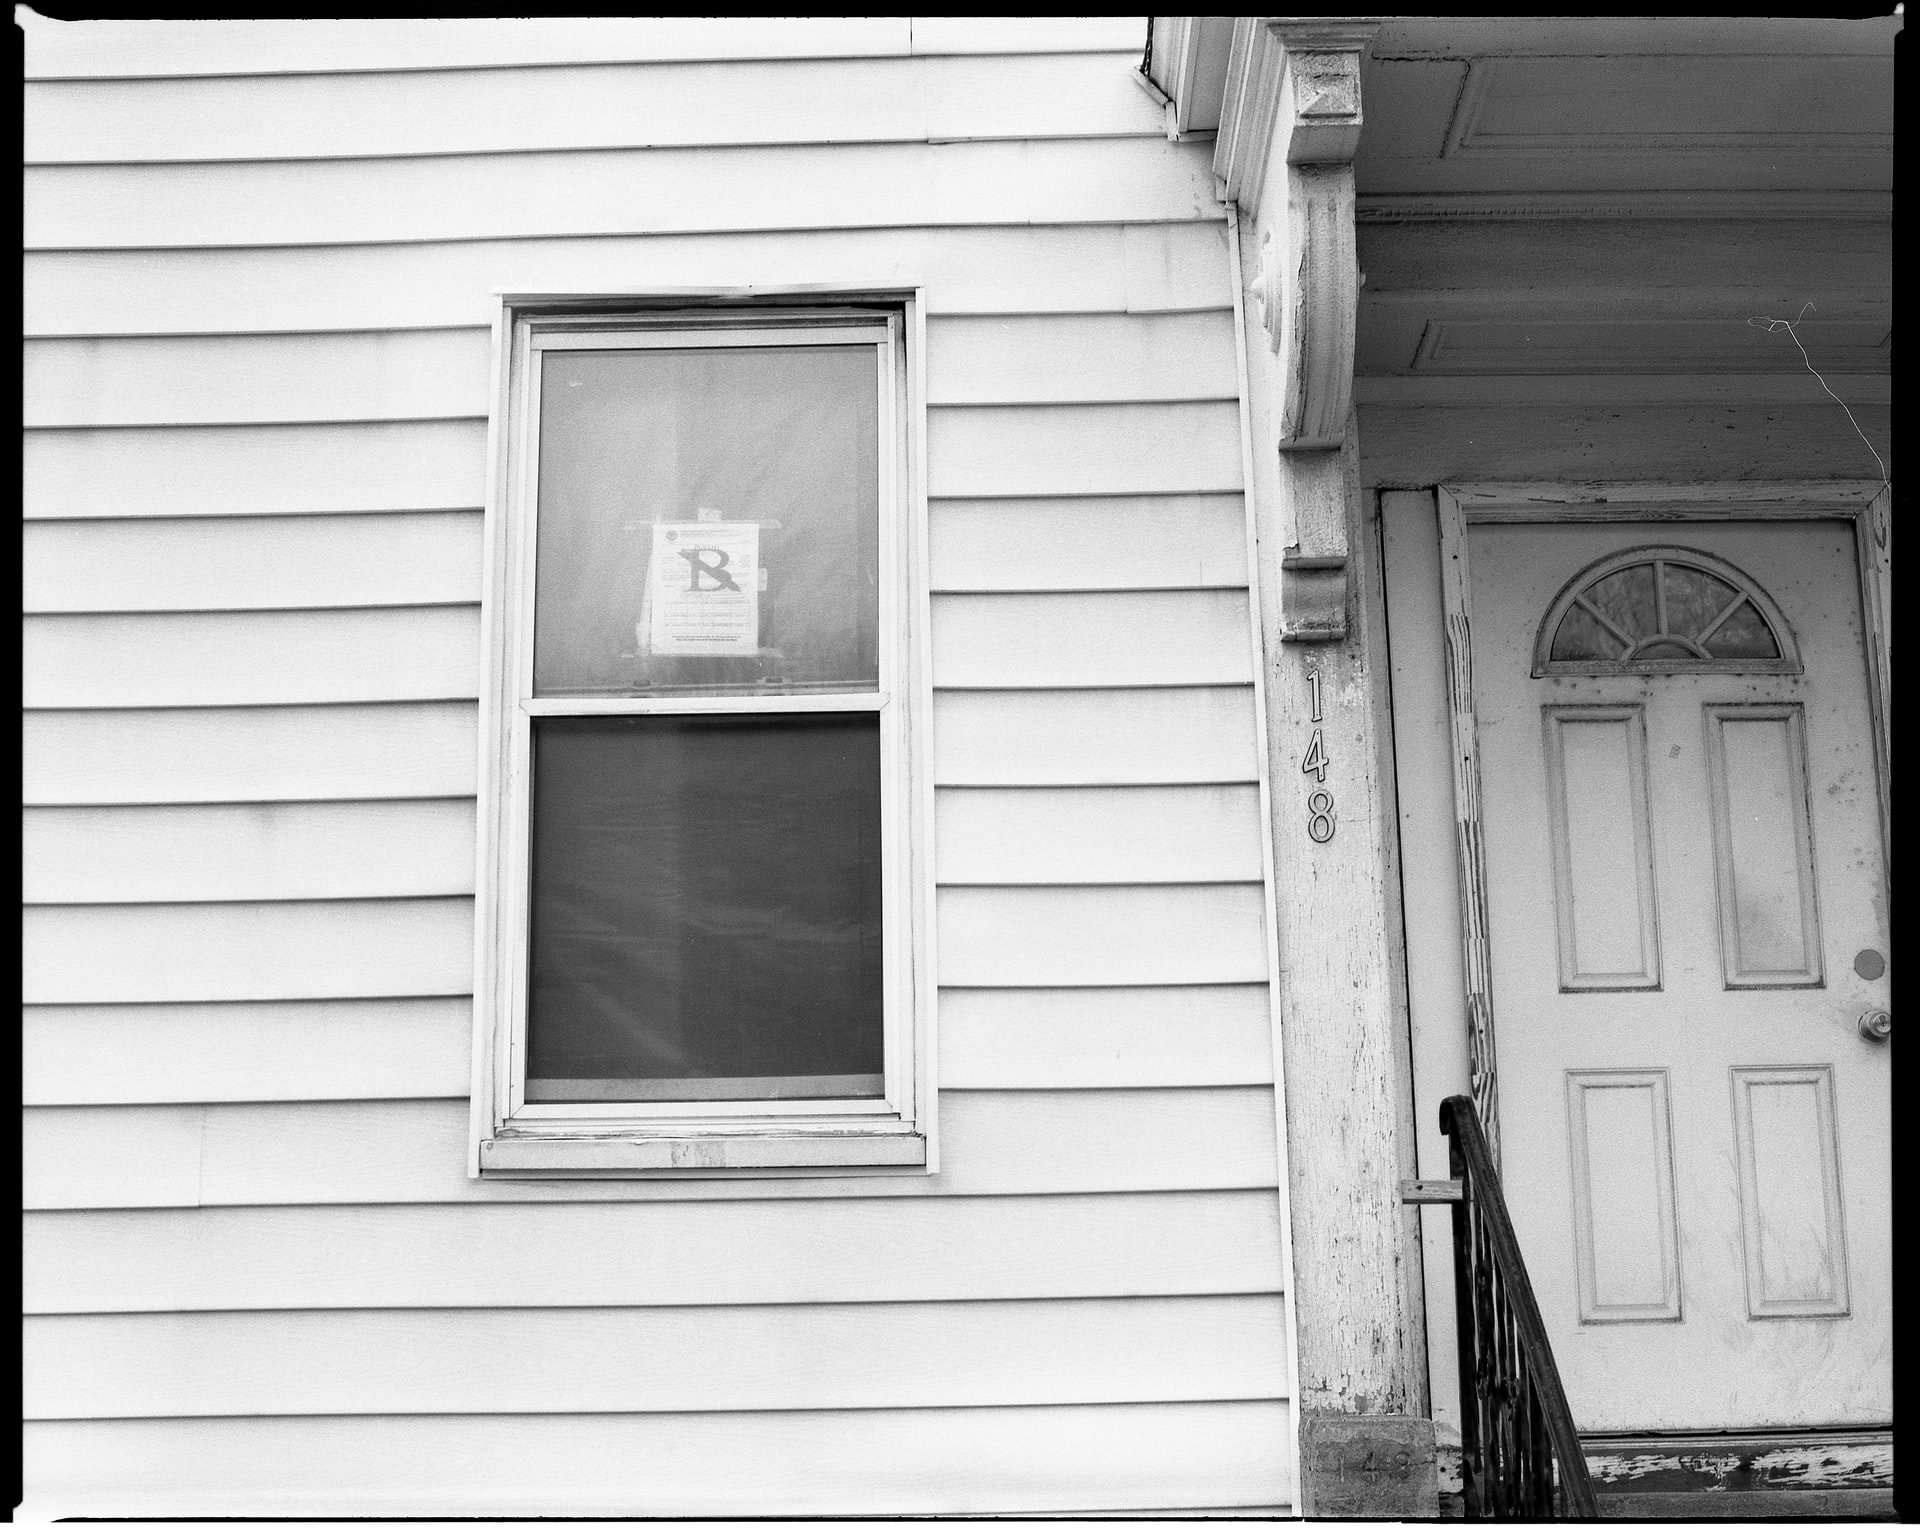 The front window of a house under eviction in Boston